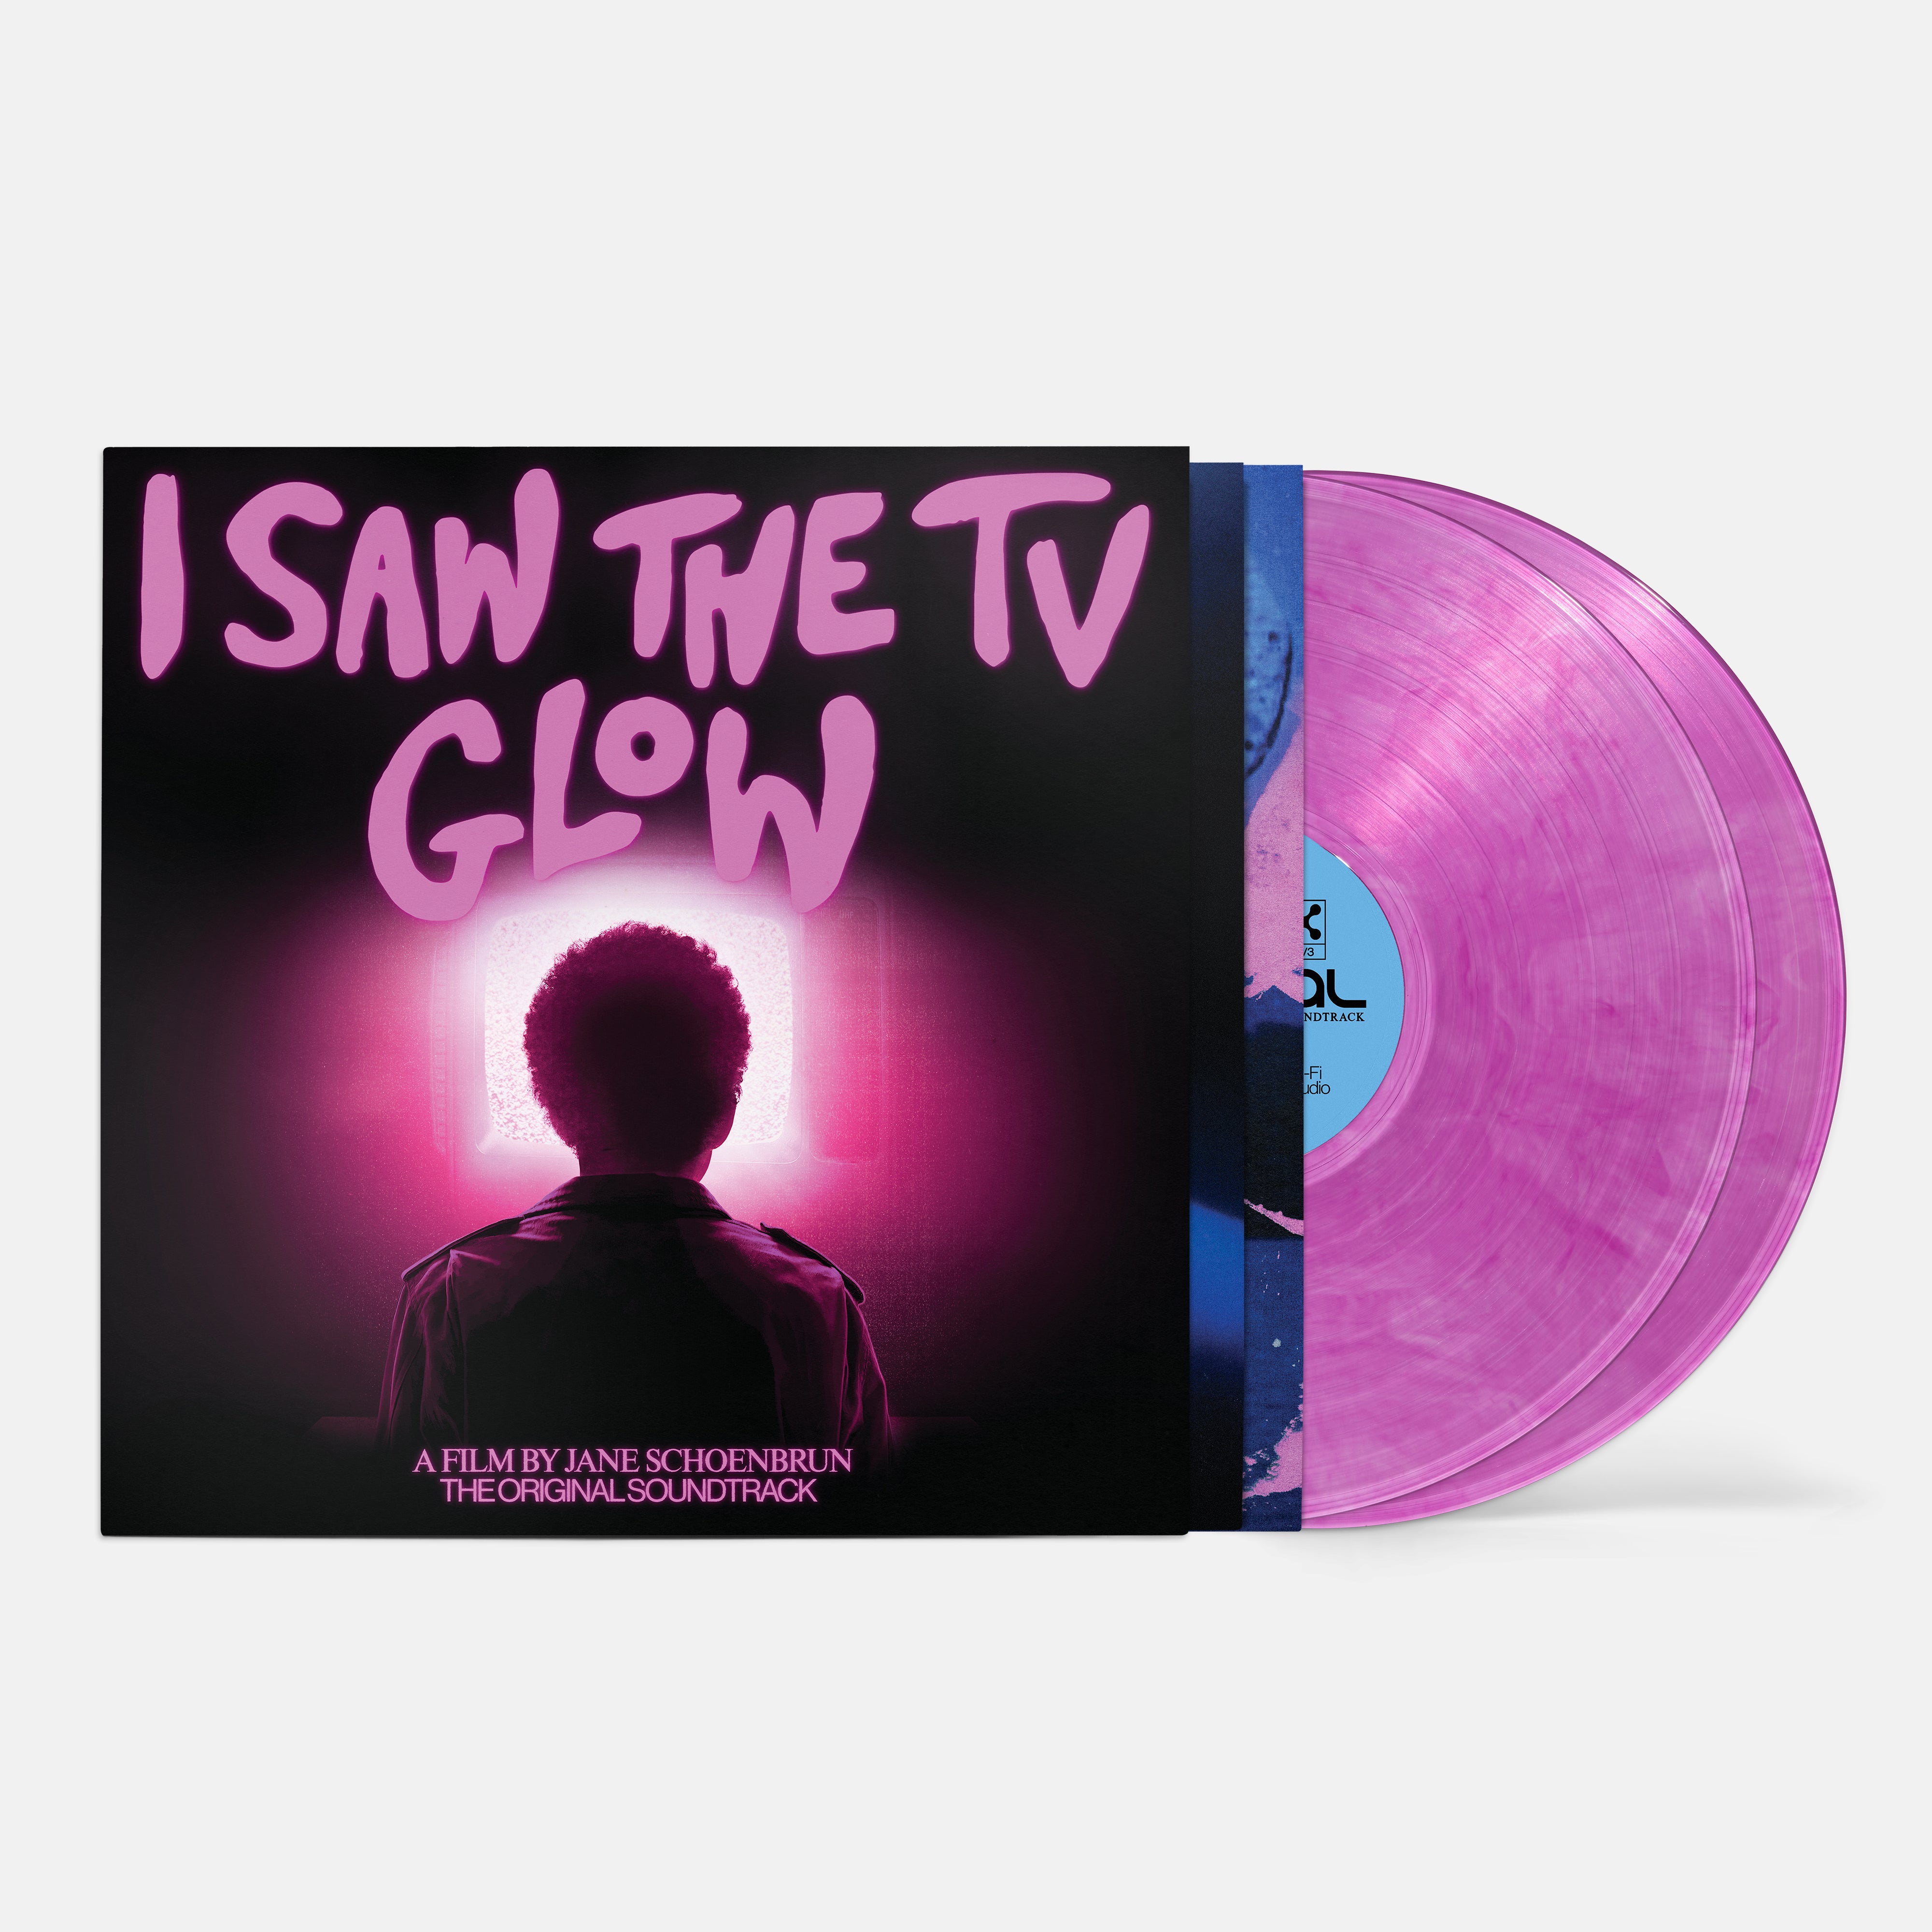 Various Artists - I Saw The TV Glow (OST): Limited Violet Vinyl 2LP